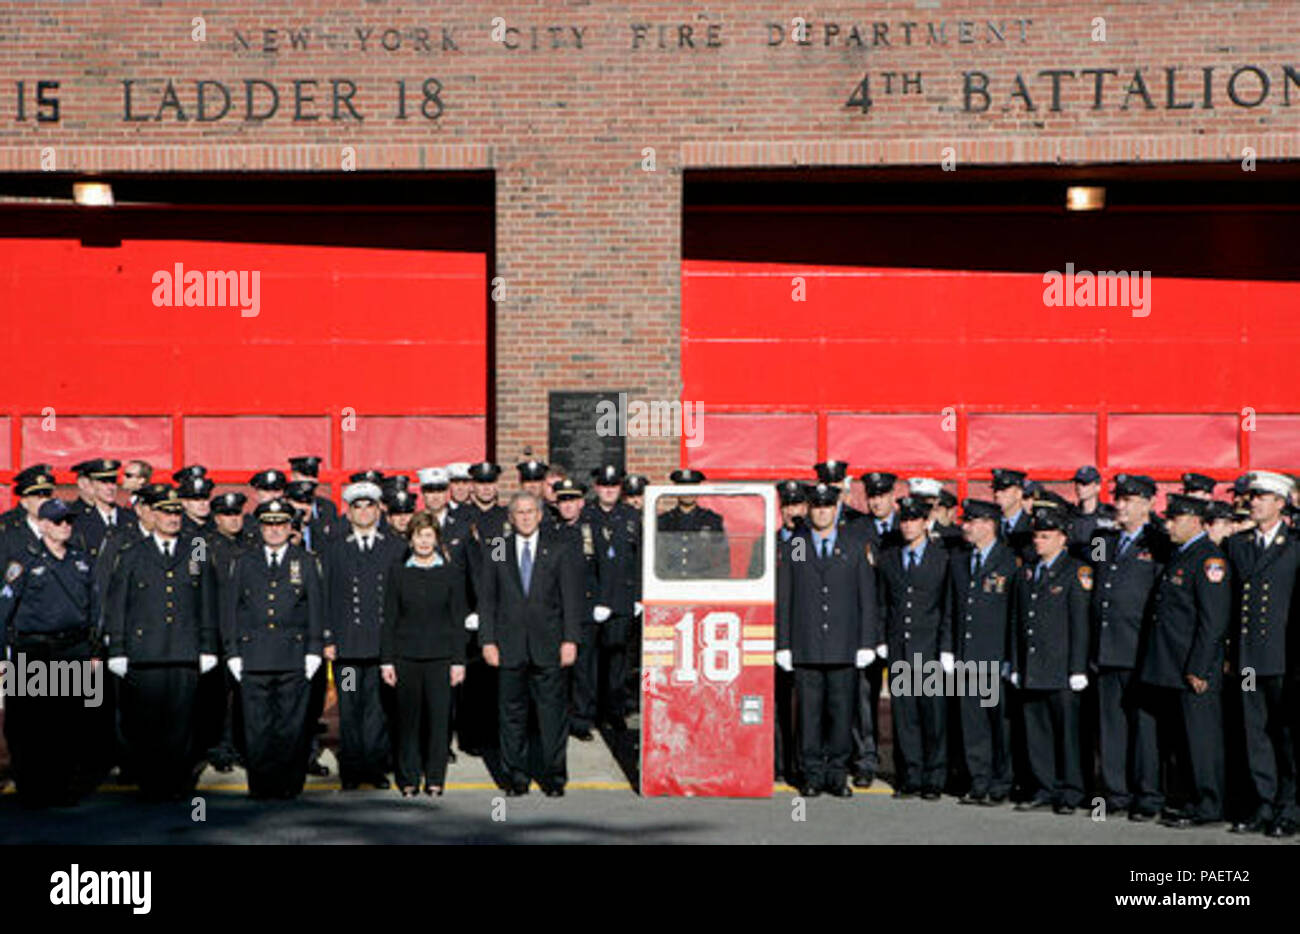 GWB FLOTUS Ceremony with New York City First Responders Commemorating the Fifth Anniversary of September 11, 2001. Stock Photo